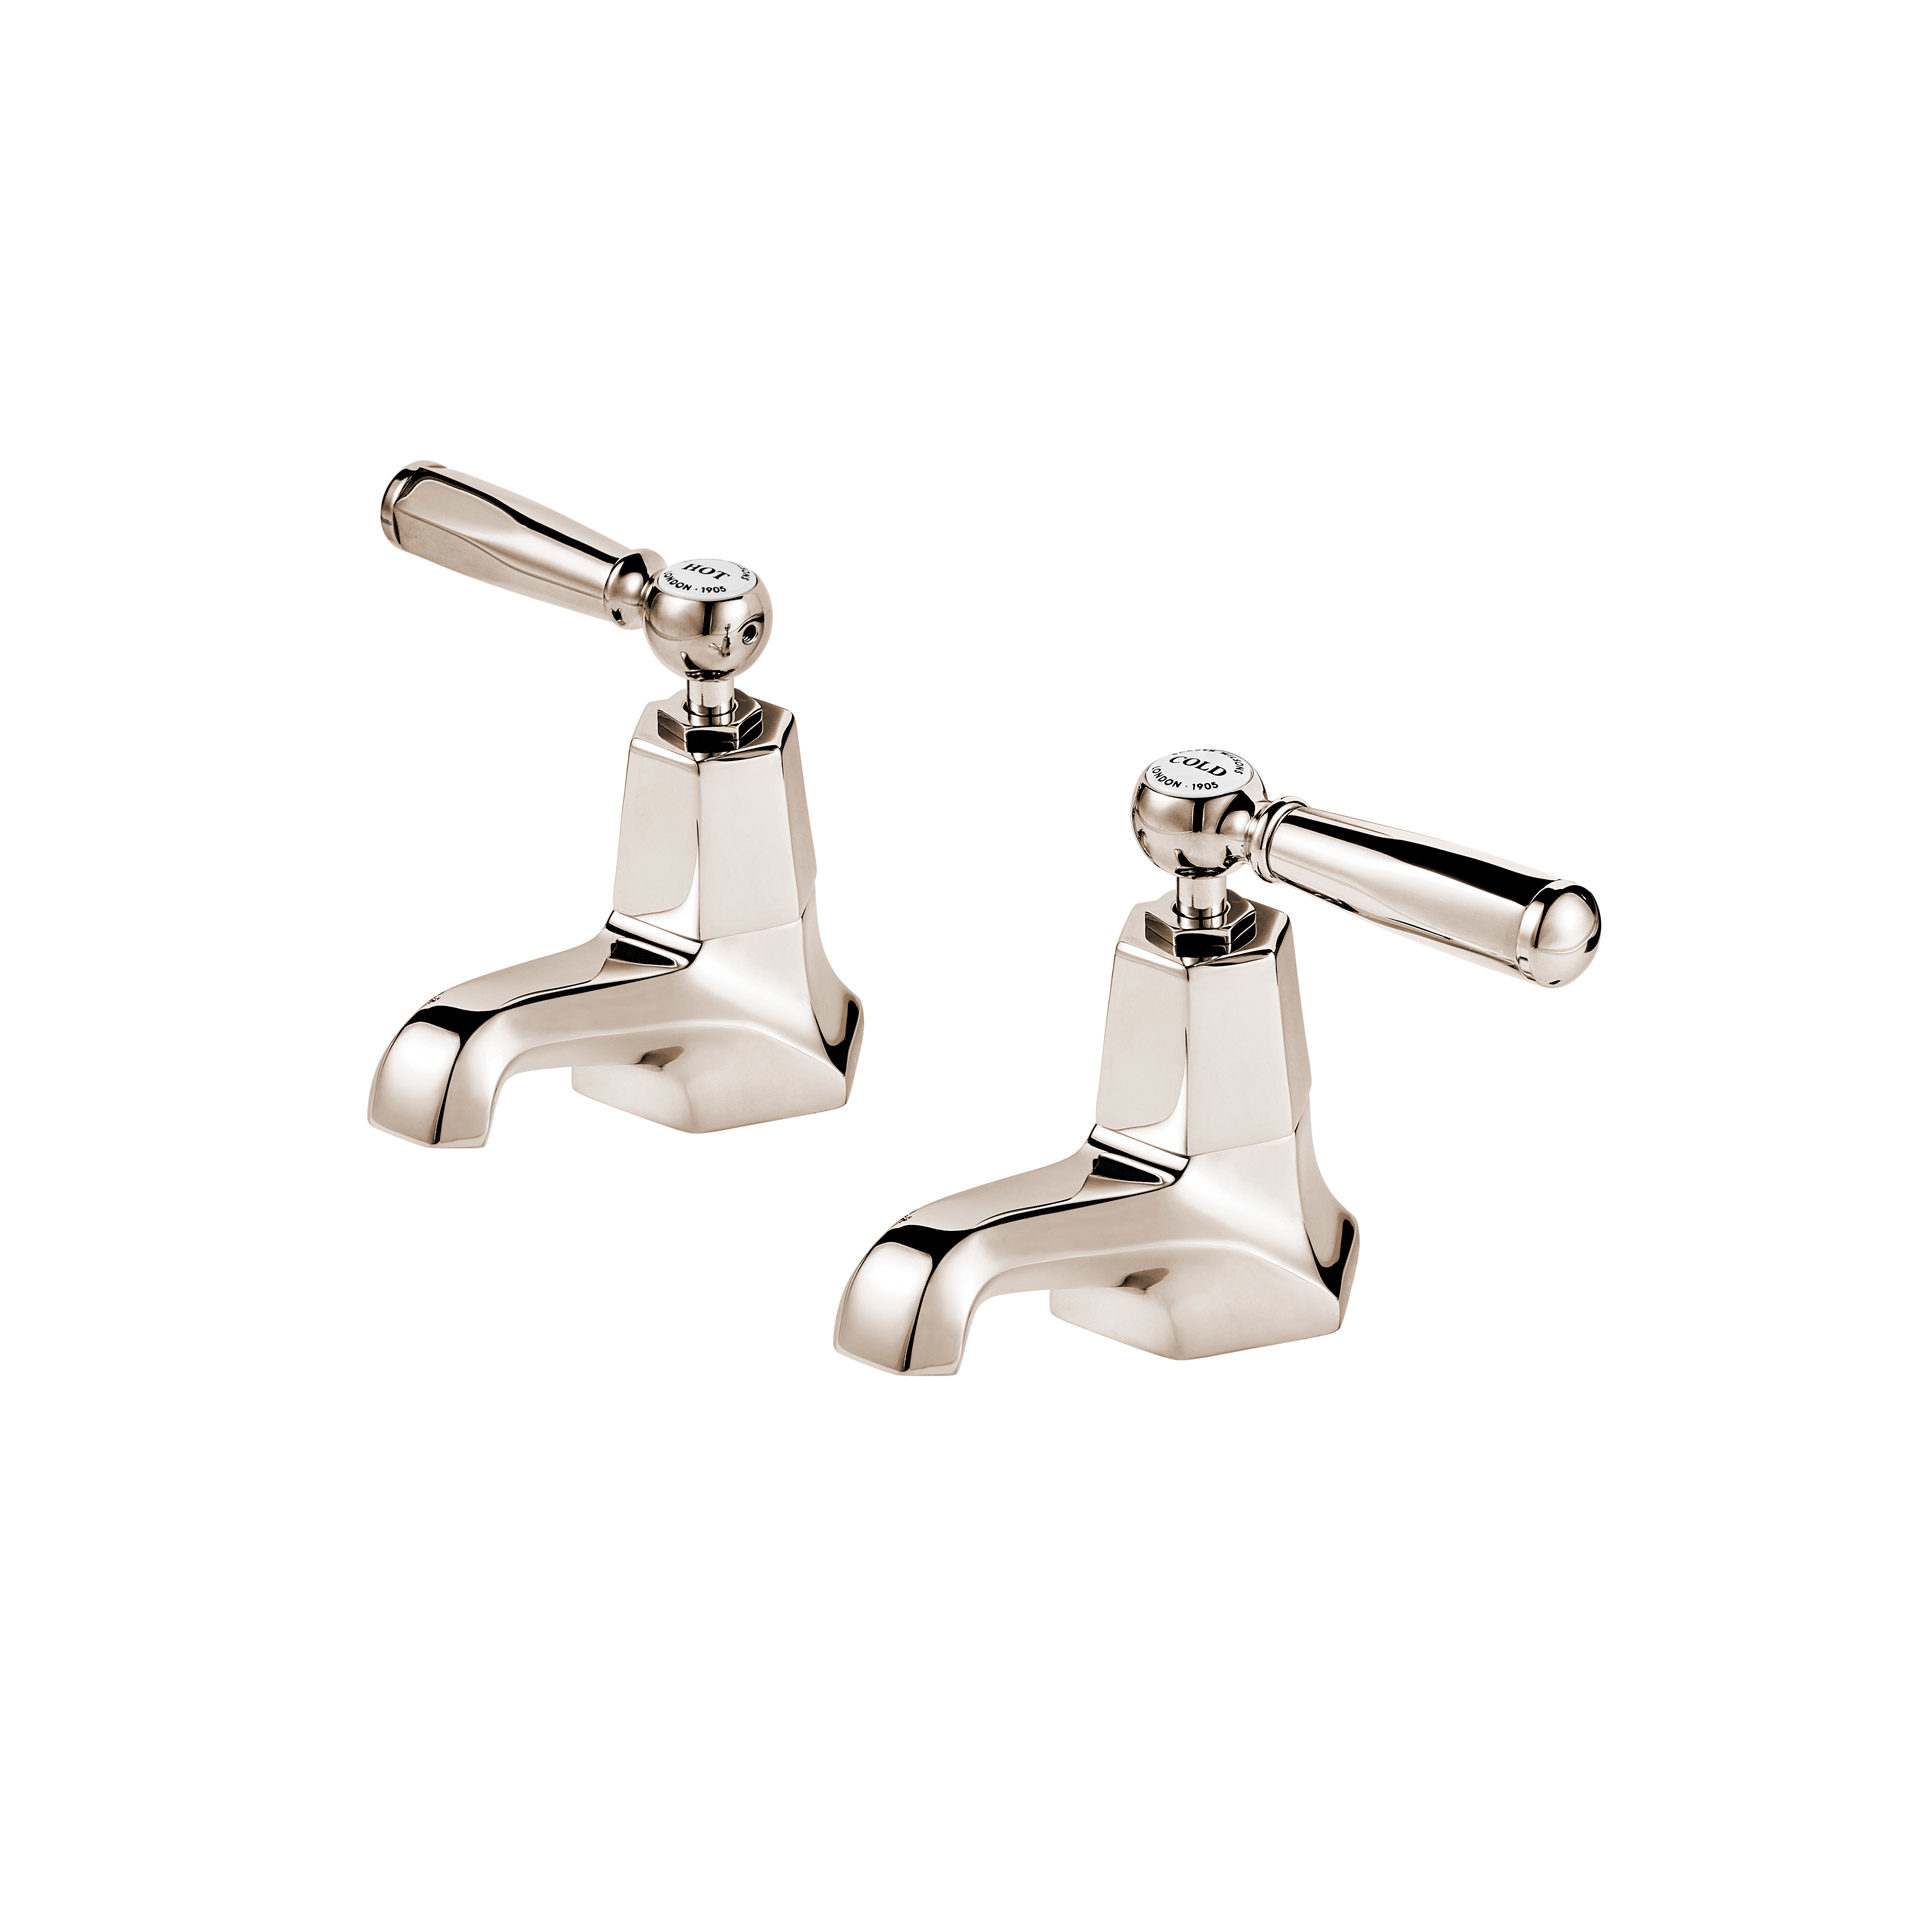 Barber Wilsons Bestselling Basin Taps with Levers with Geometric Design in Polished Nickel